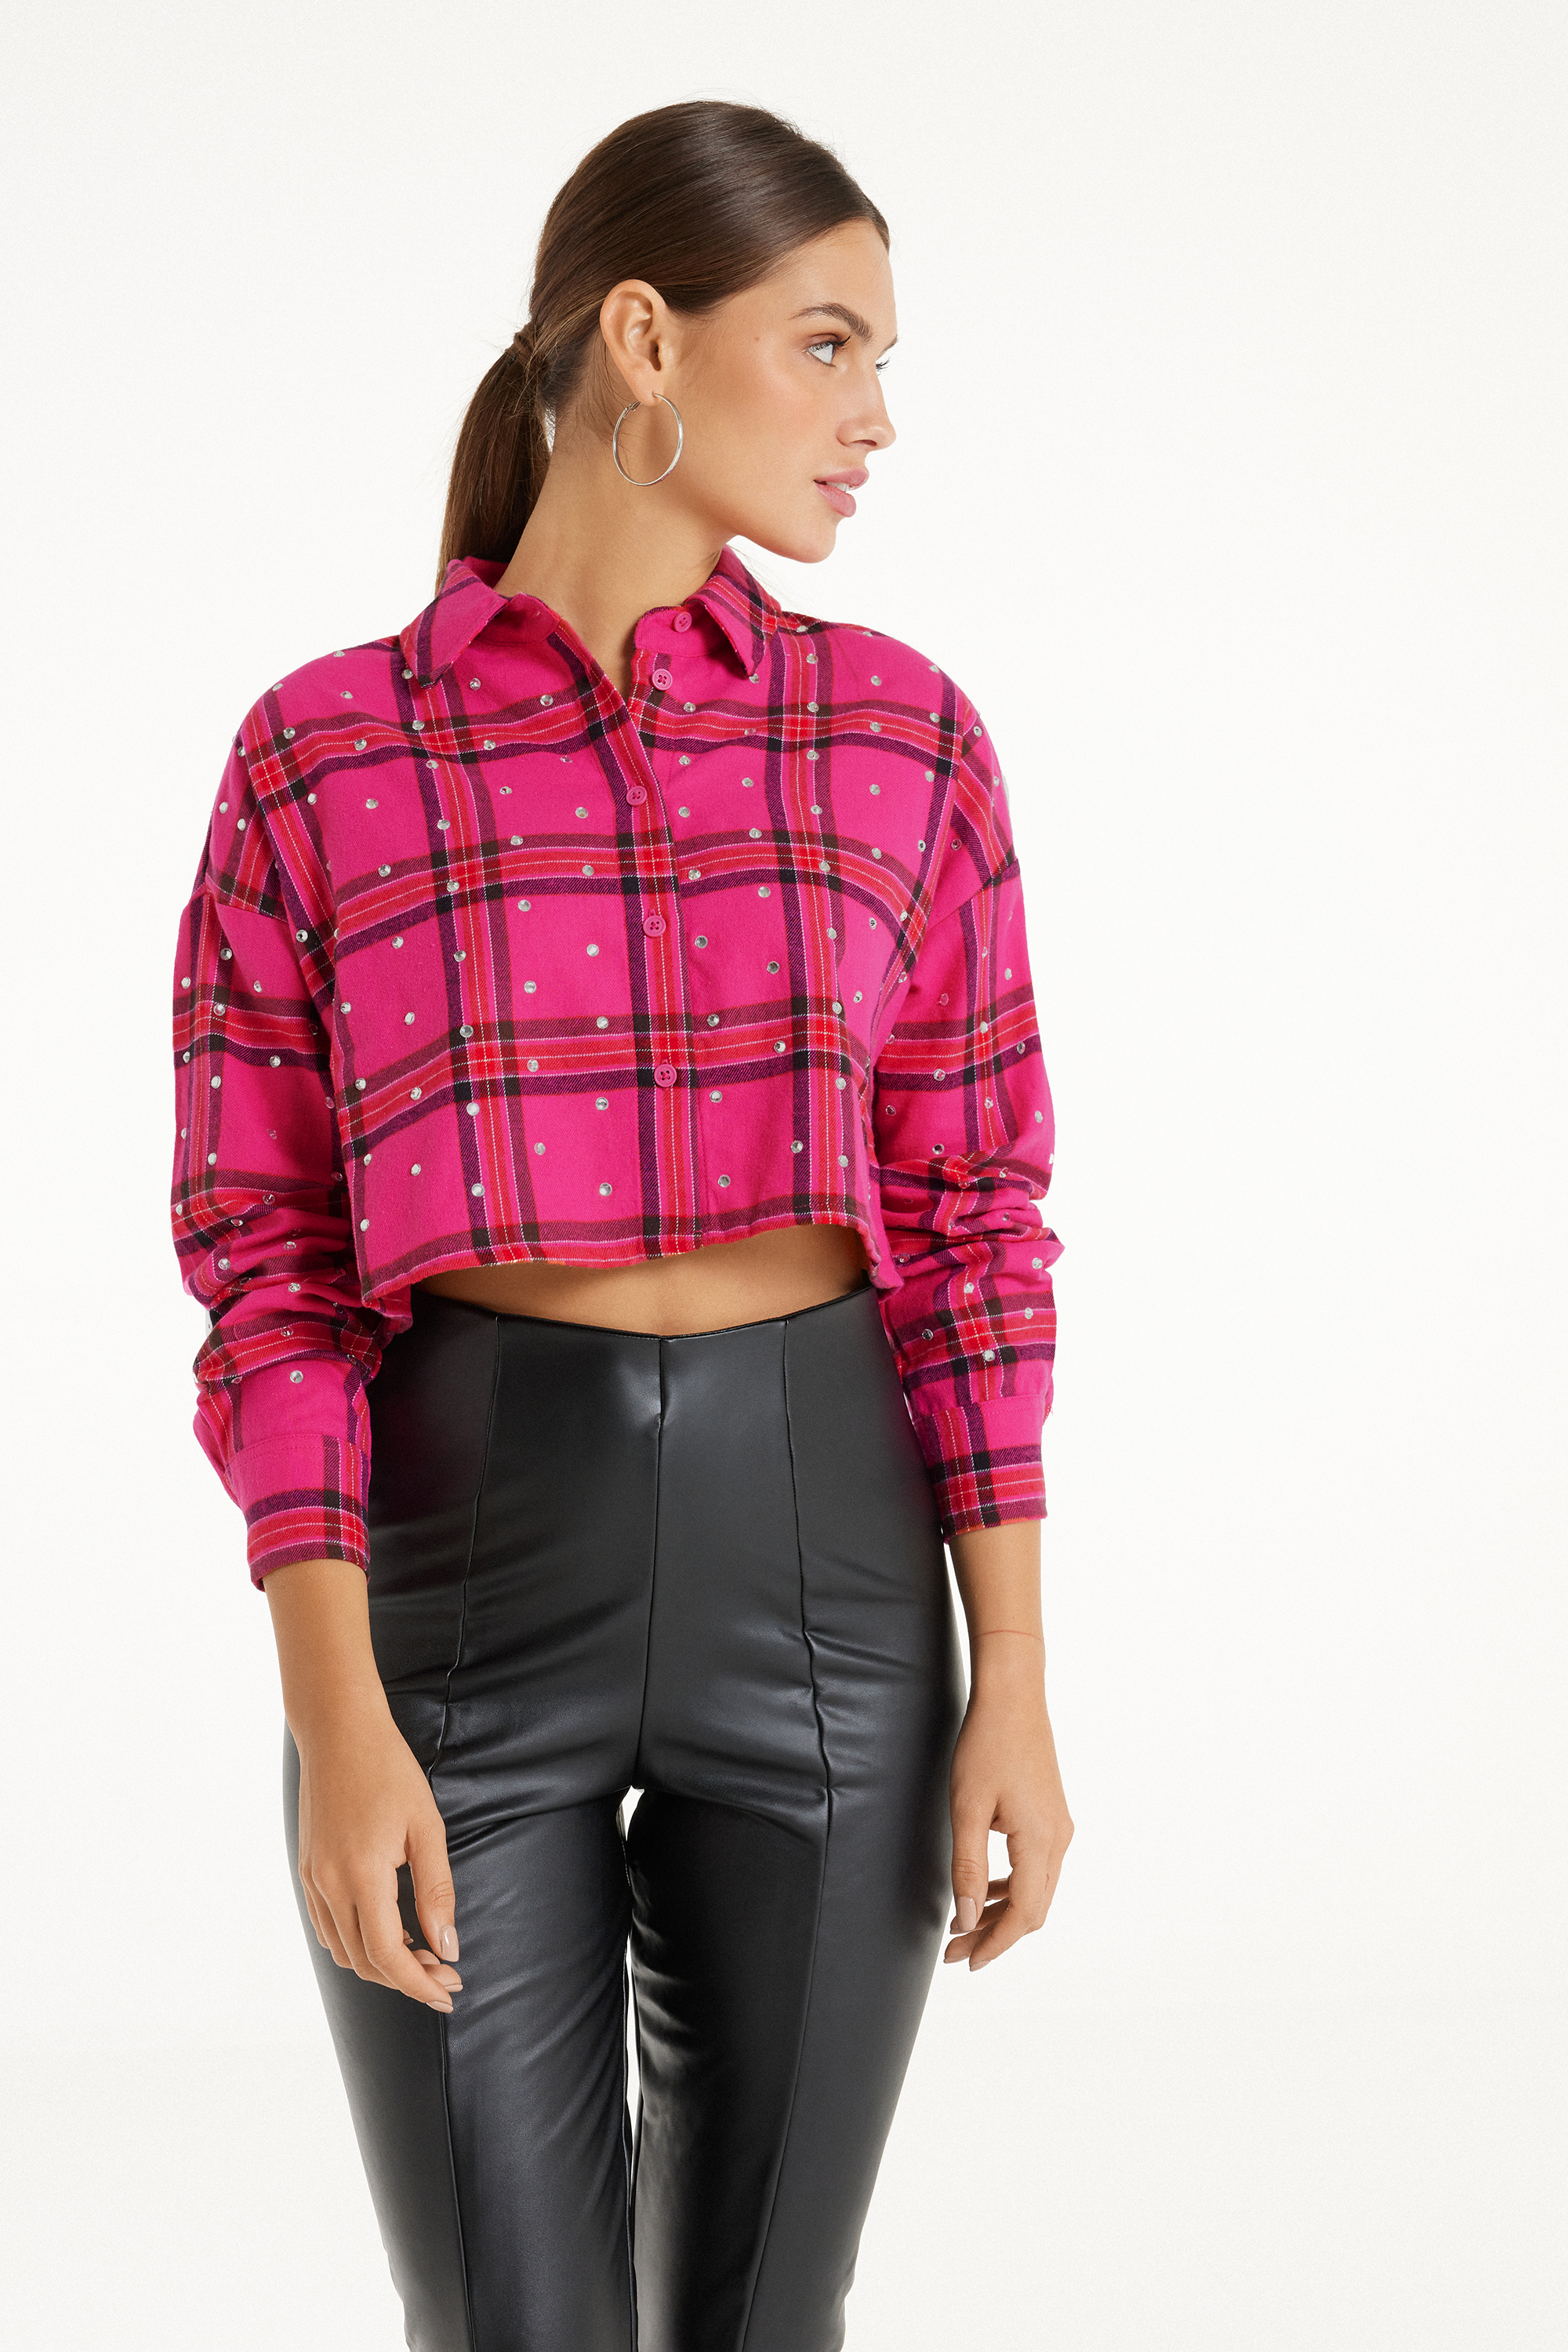 Long-Sleeved Short Flannel Shirt with Rhinestones